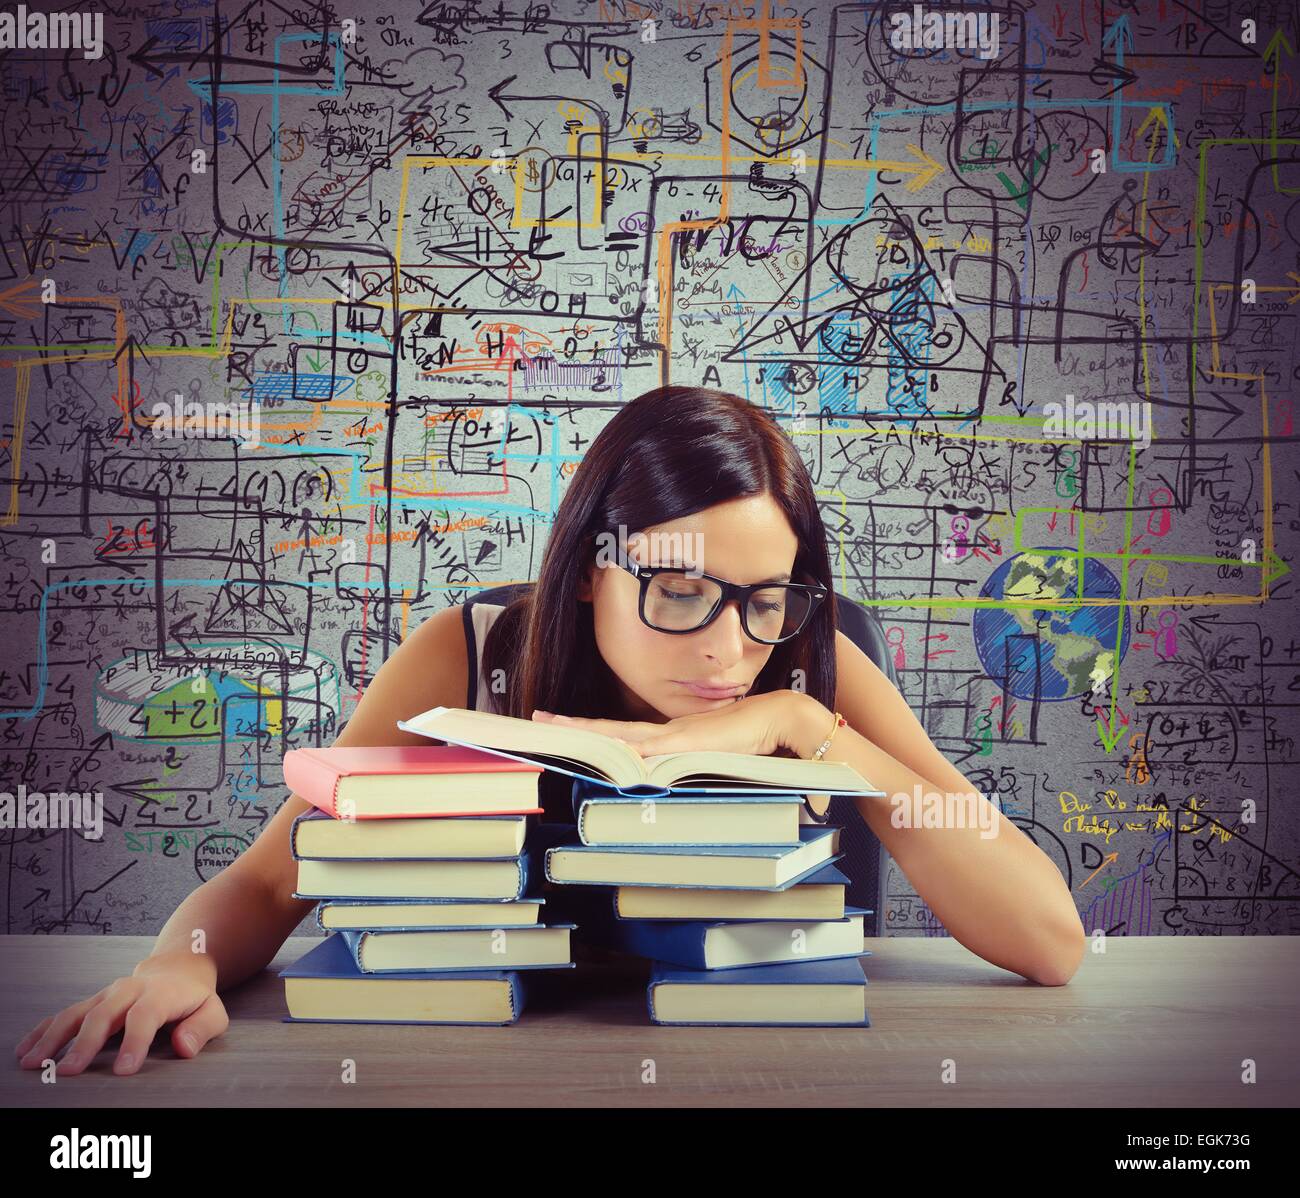 Bored student reads books Stock Photo